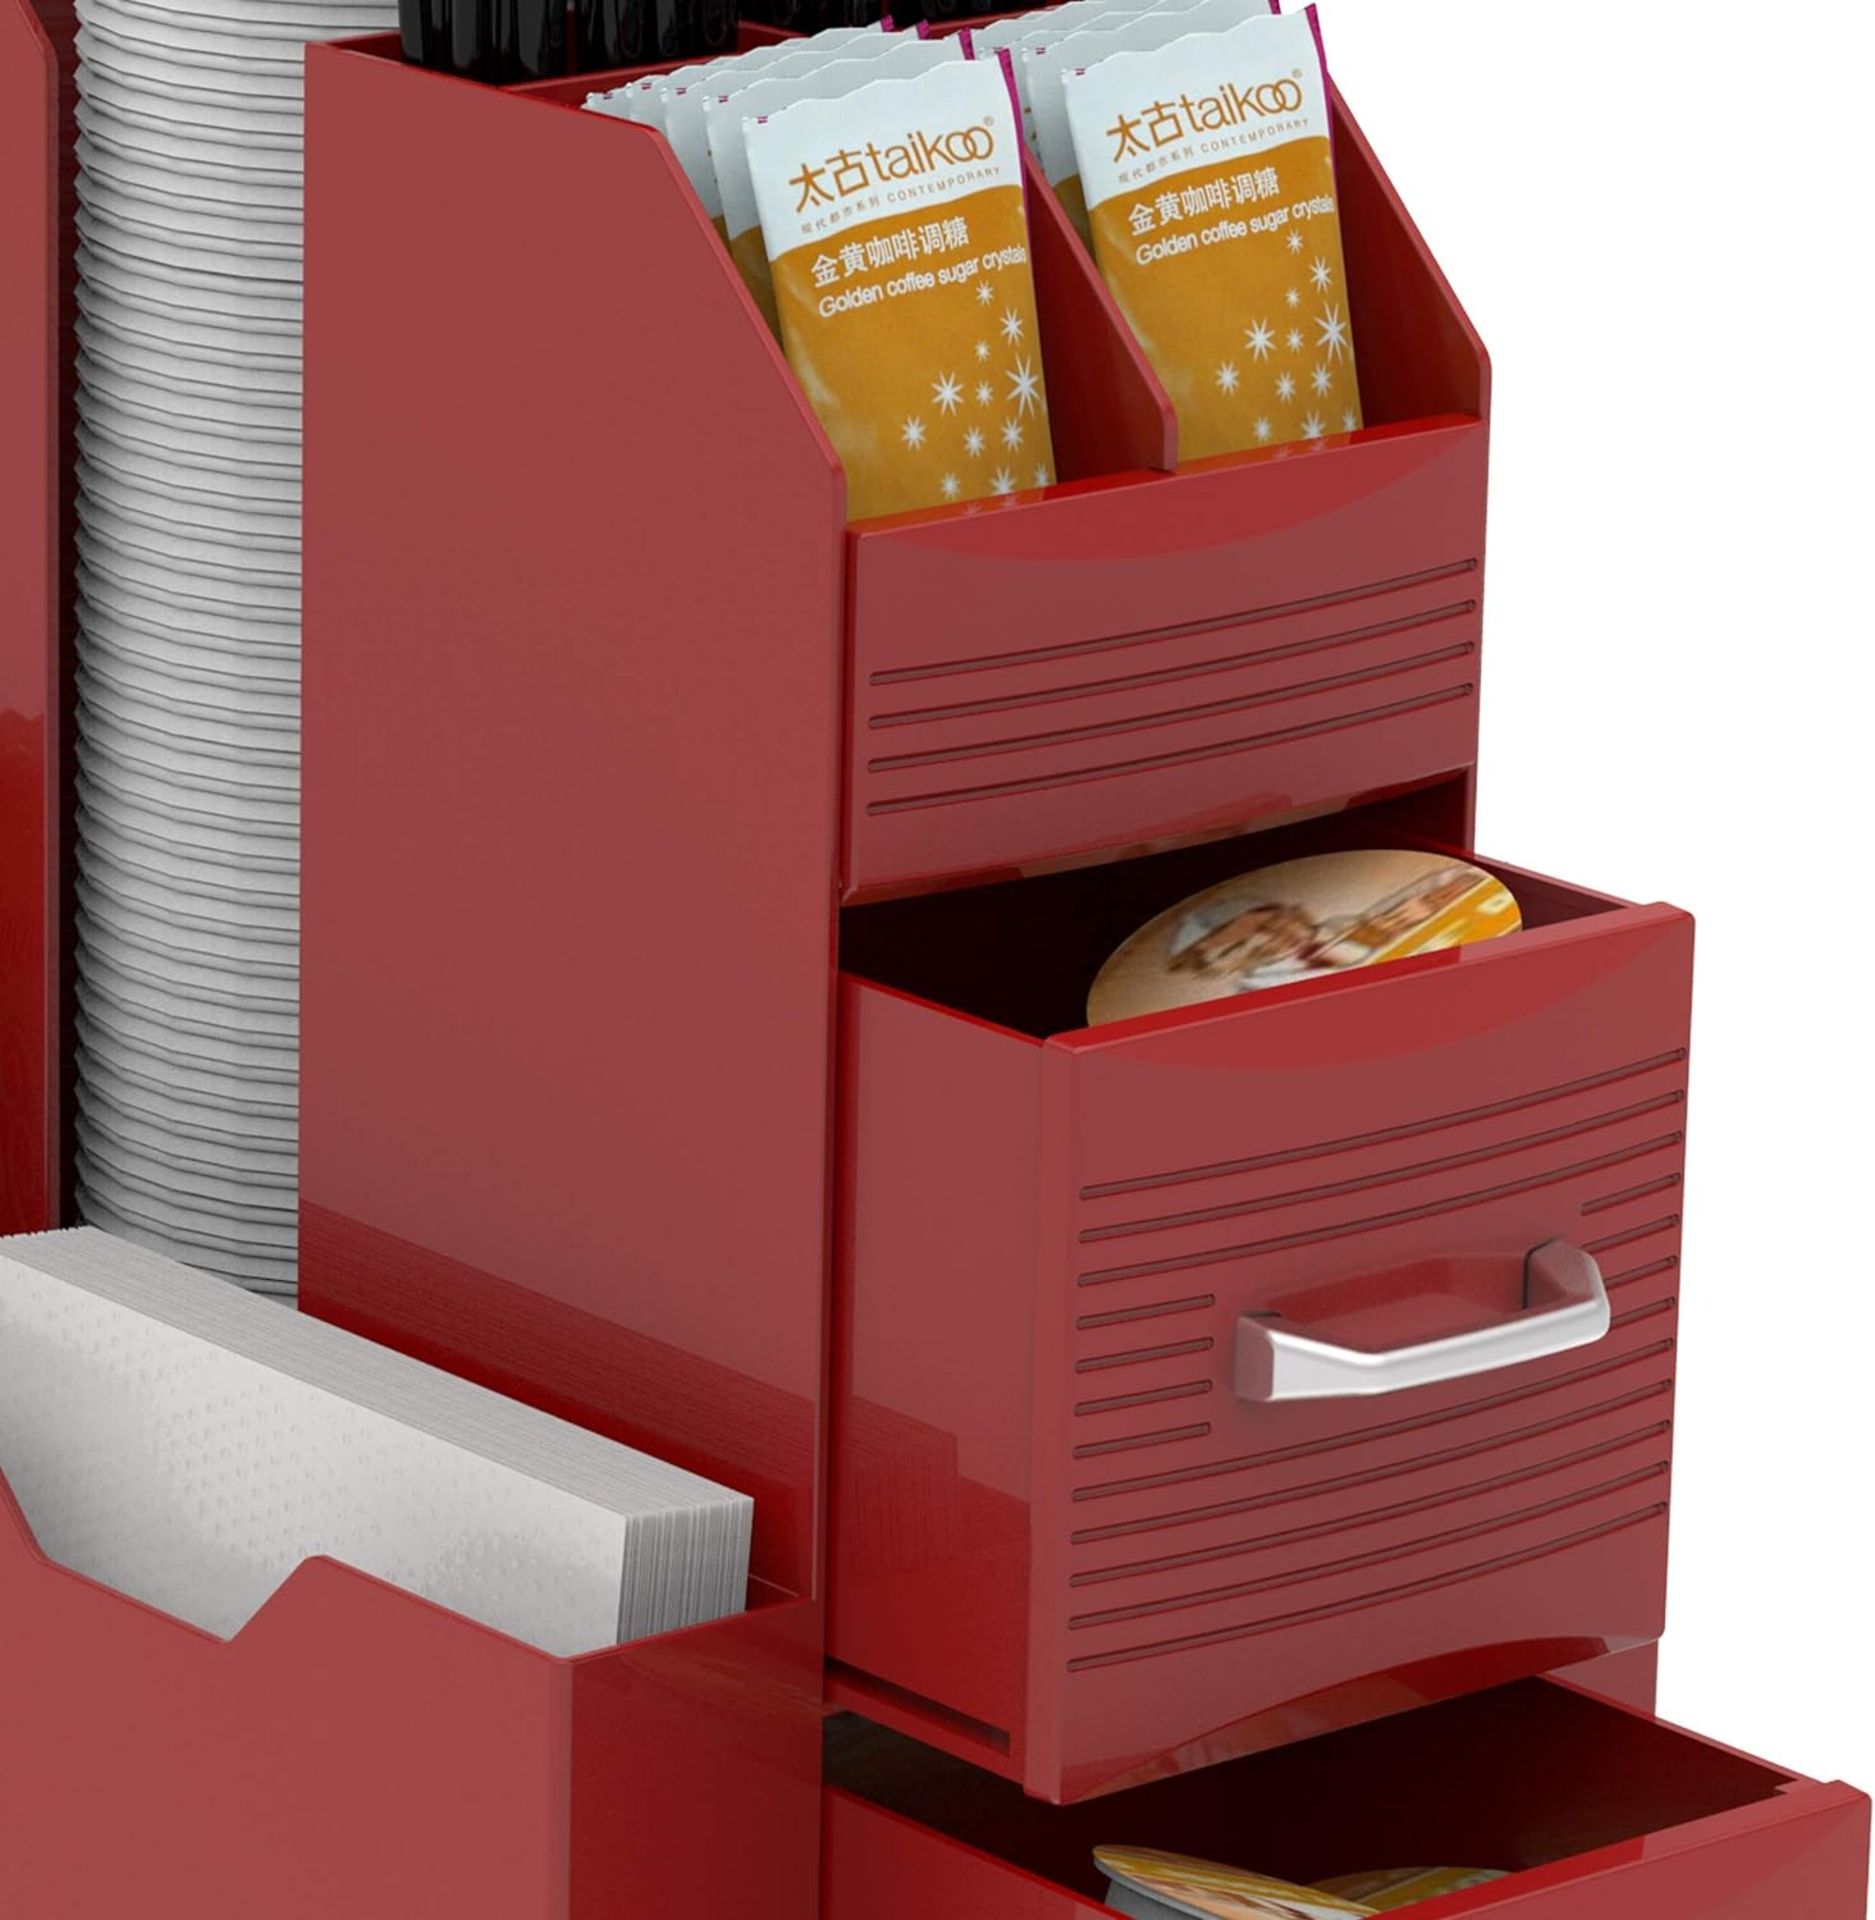 FULL PALLET OF RED HALTER COFFEE ACCESSORIES CADDY ORGANIZER - 9 COMPARTMENTS AND 2 DRAWERS - Image 4 of 6